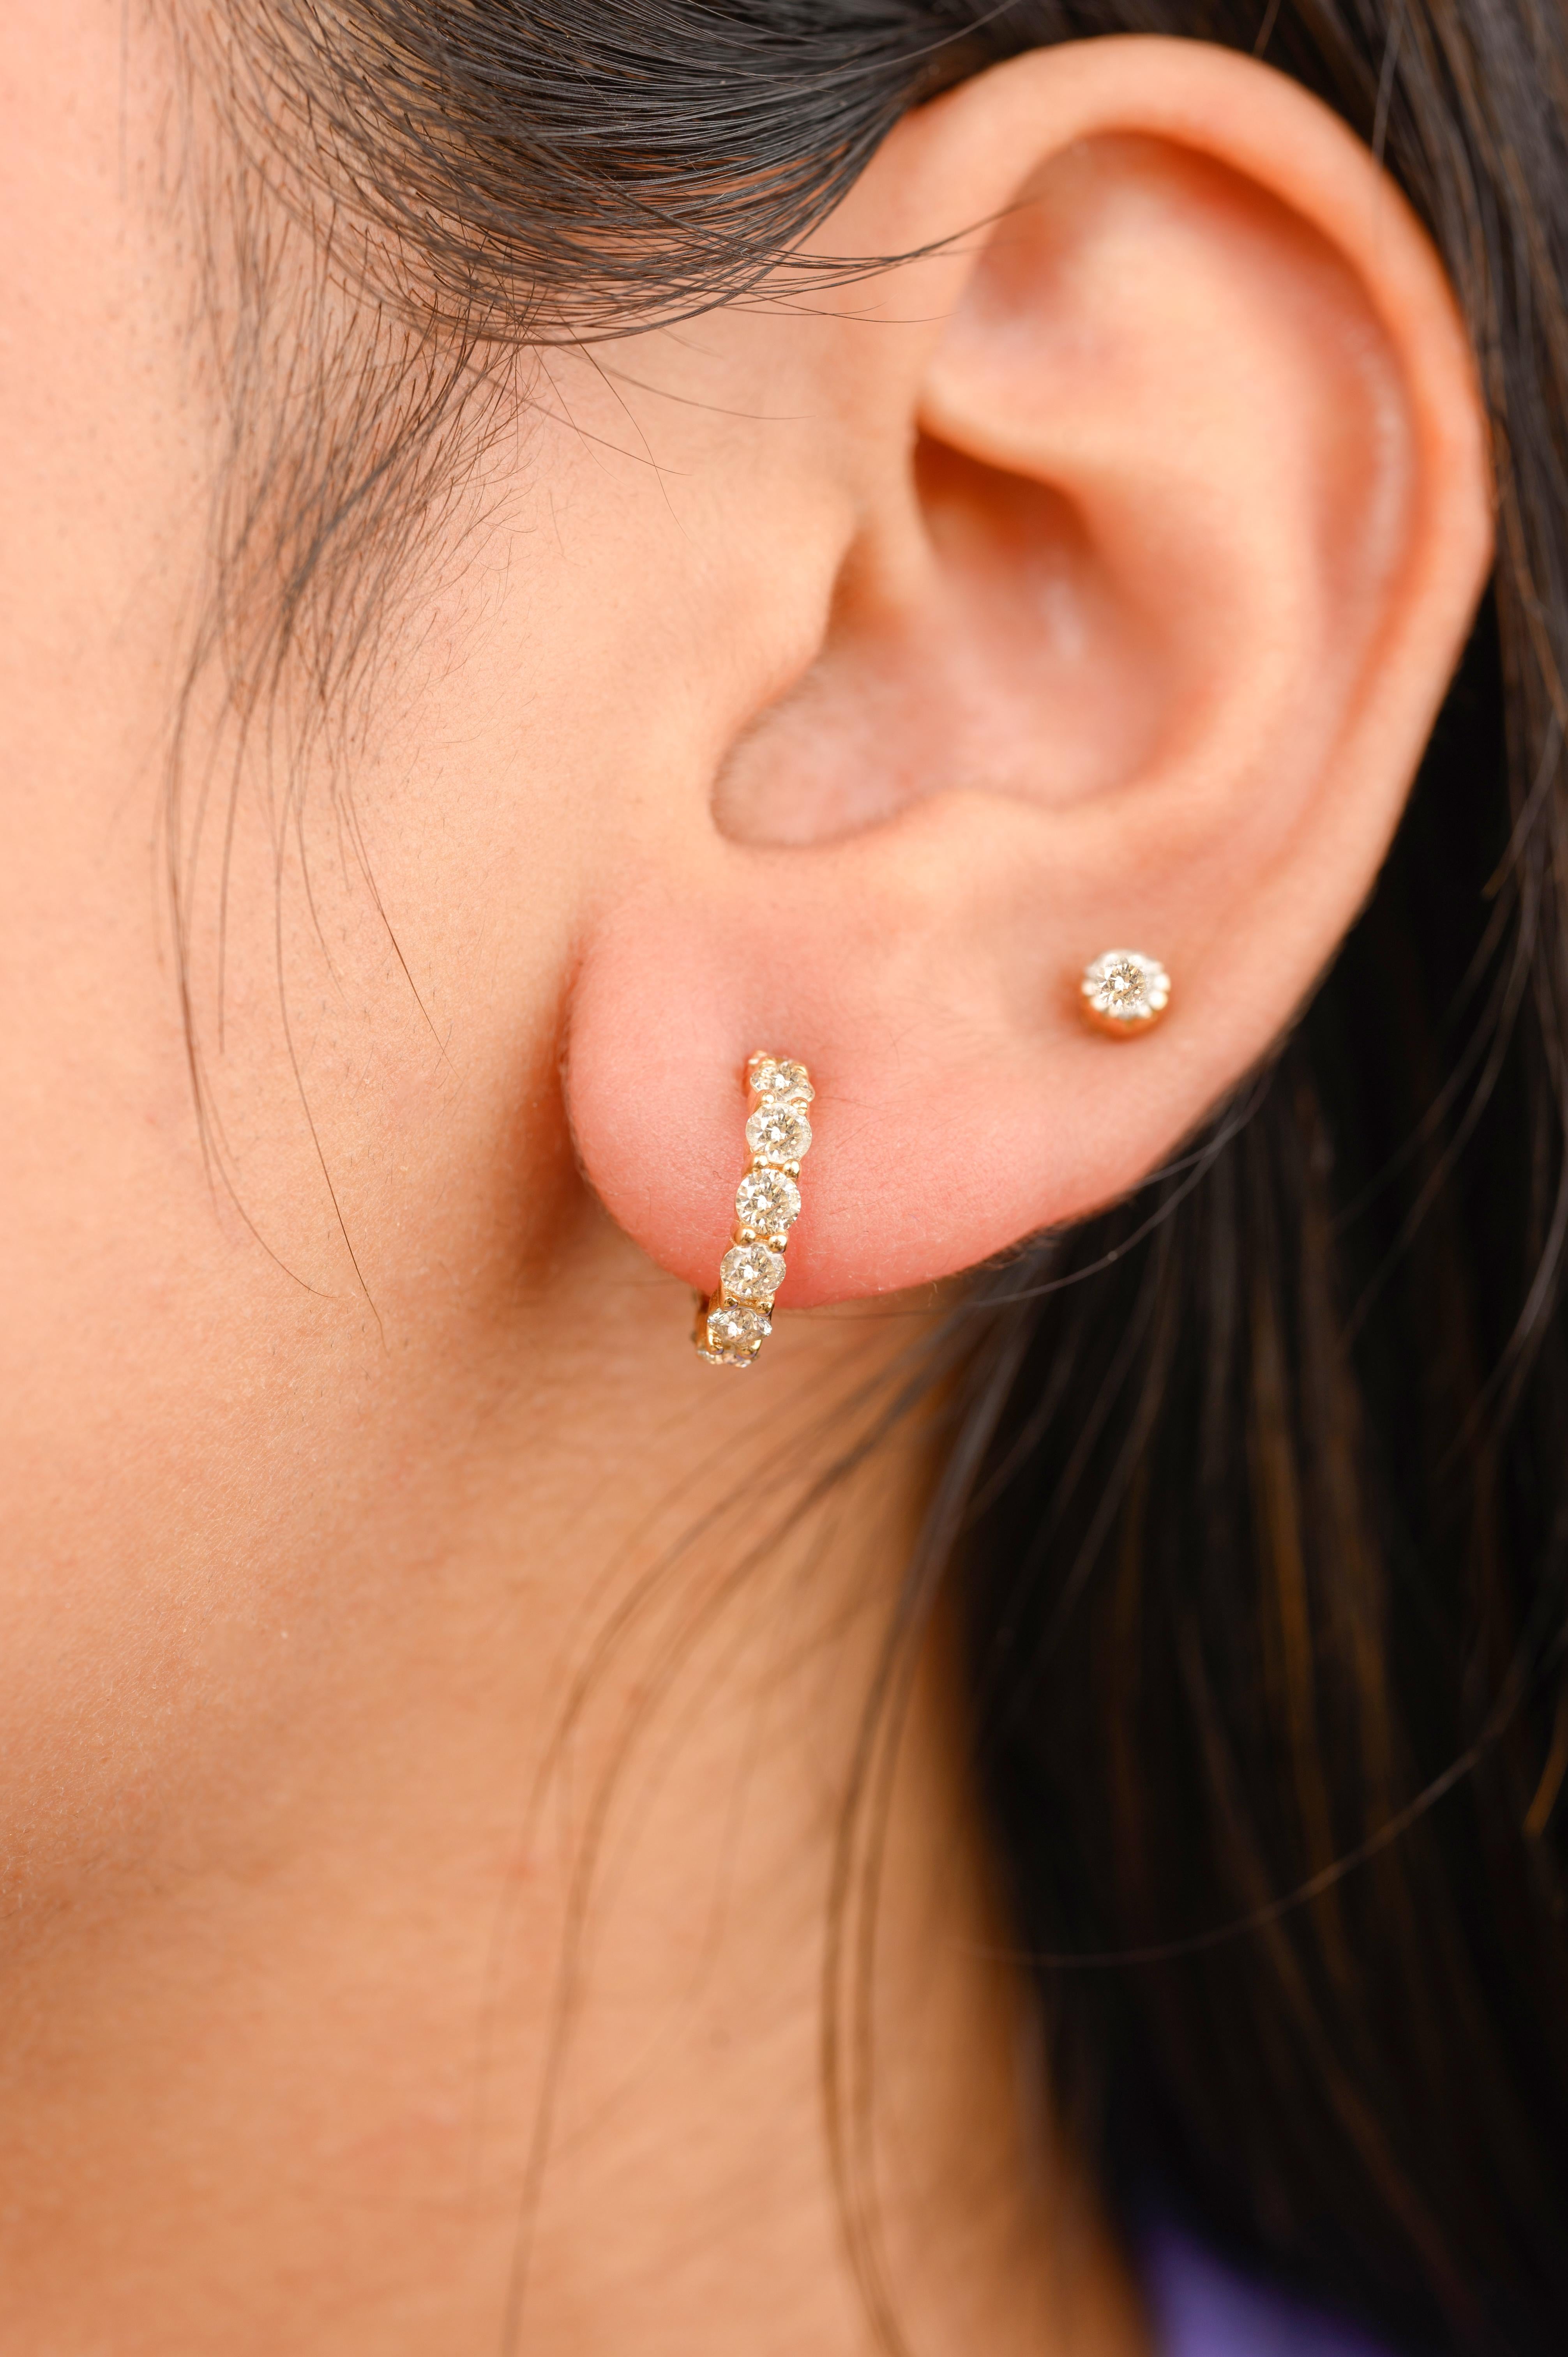 Dainty Everyday Diamond Hoop Earrings in 18K Gold to make a statement with your look. You shall need stud earrings to make a statement with your look. These earrings create a sparkling, luxurious look featuring round cut diamonds.
April birthstone